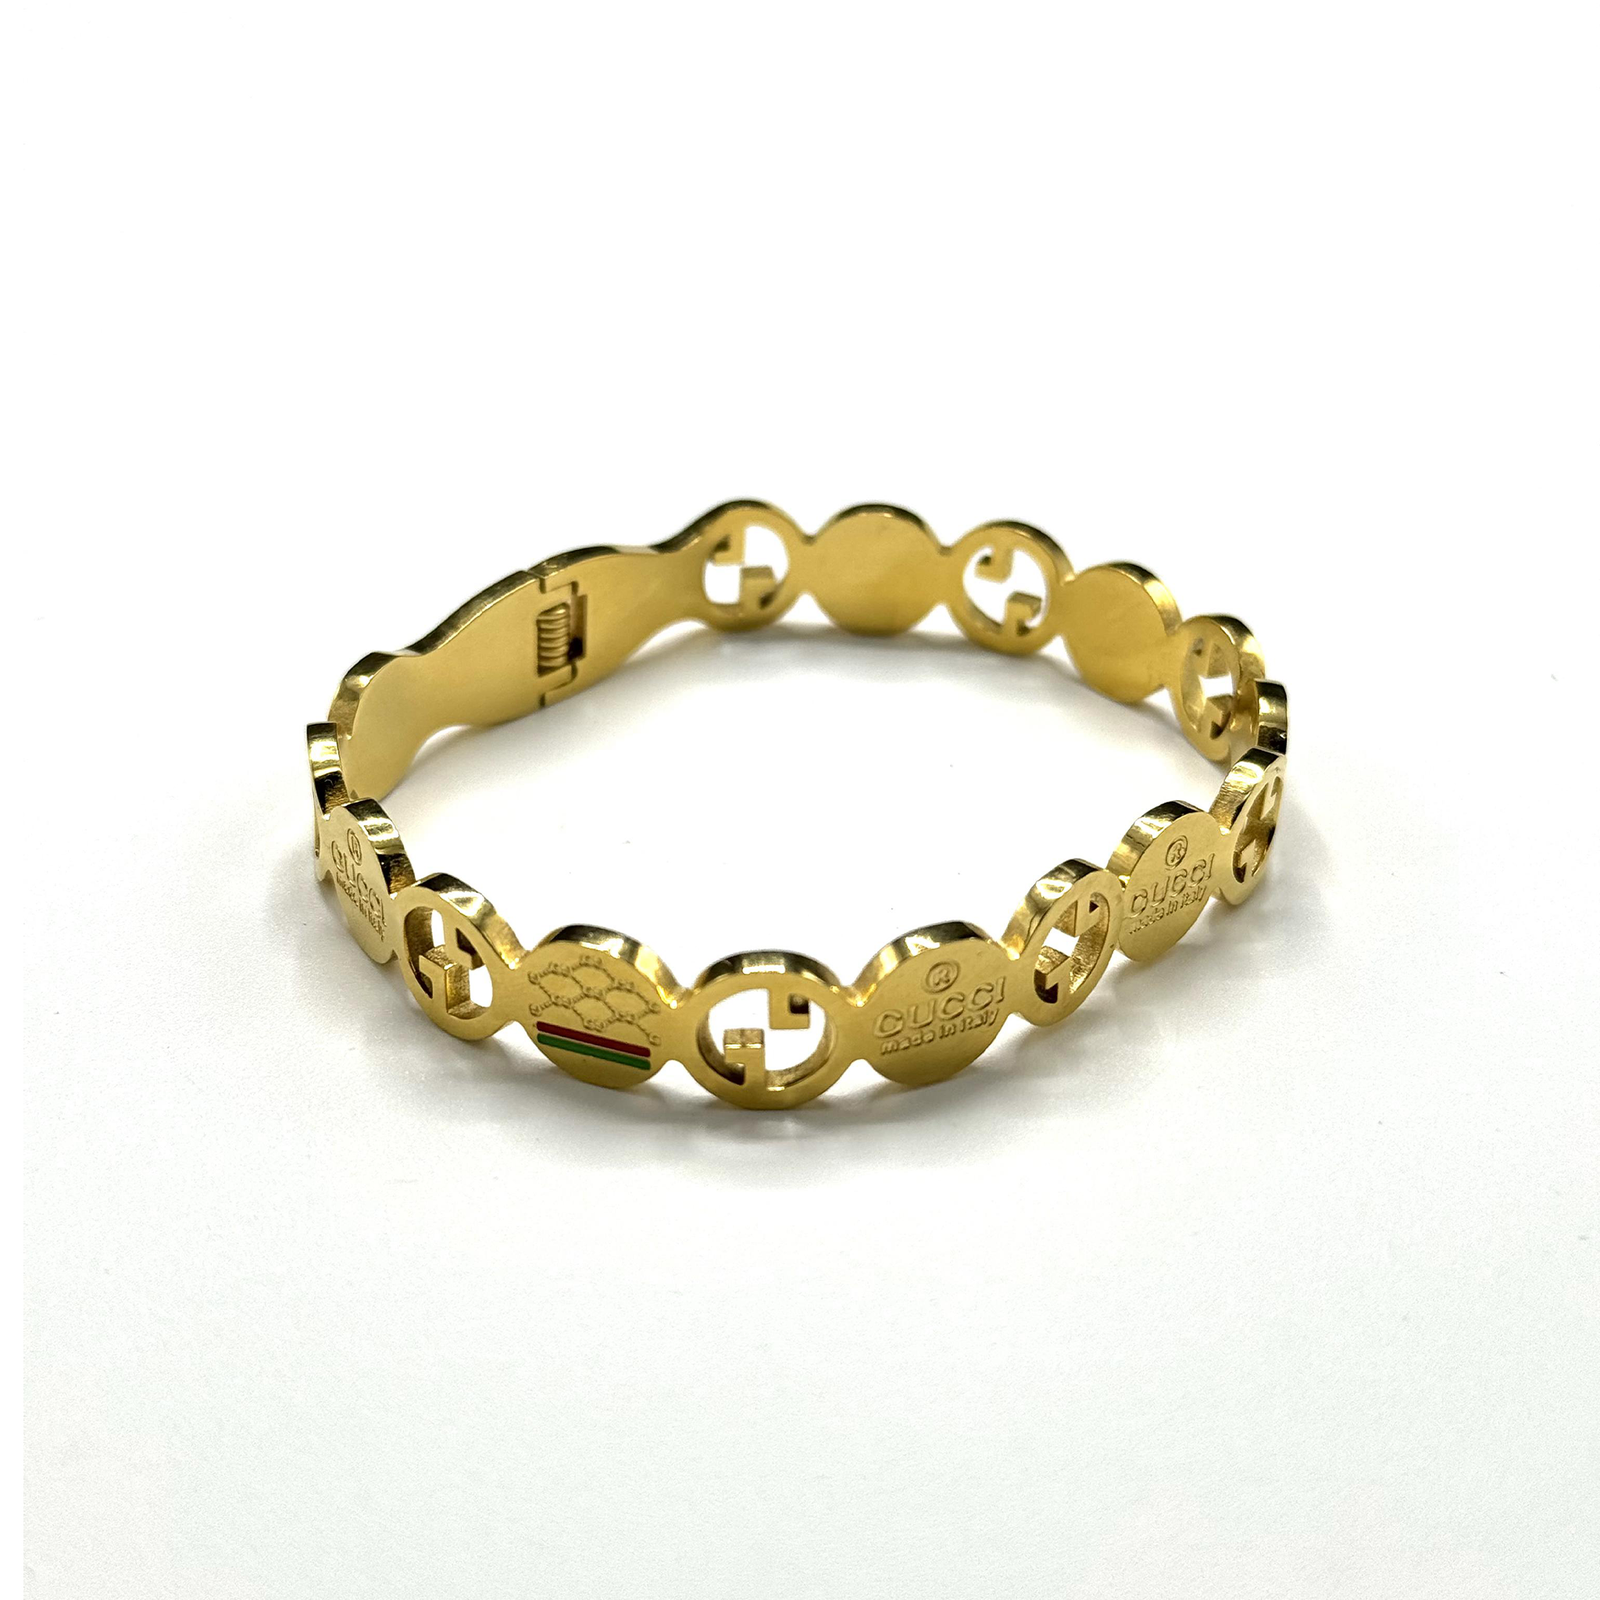 Gucci Style Gold Plated Premium Quality Luxury Bracelet